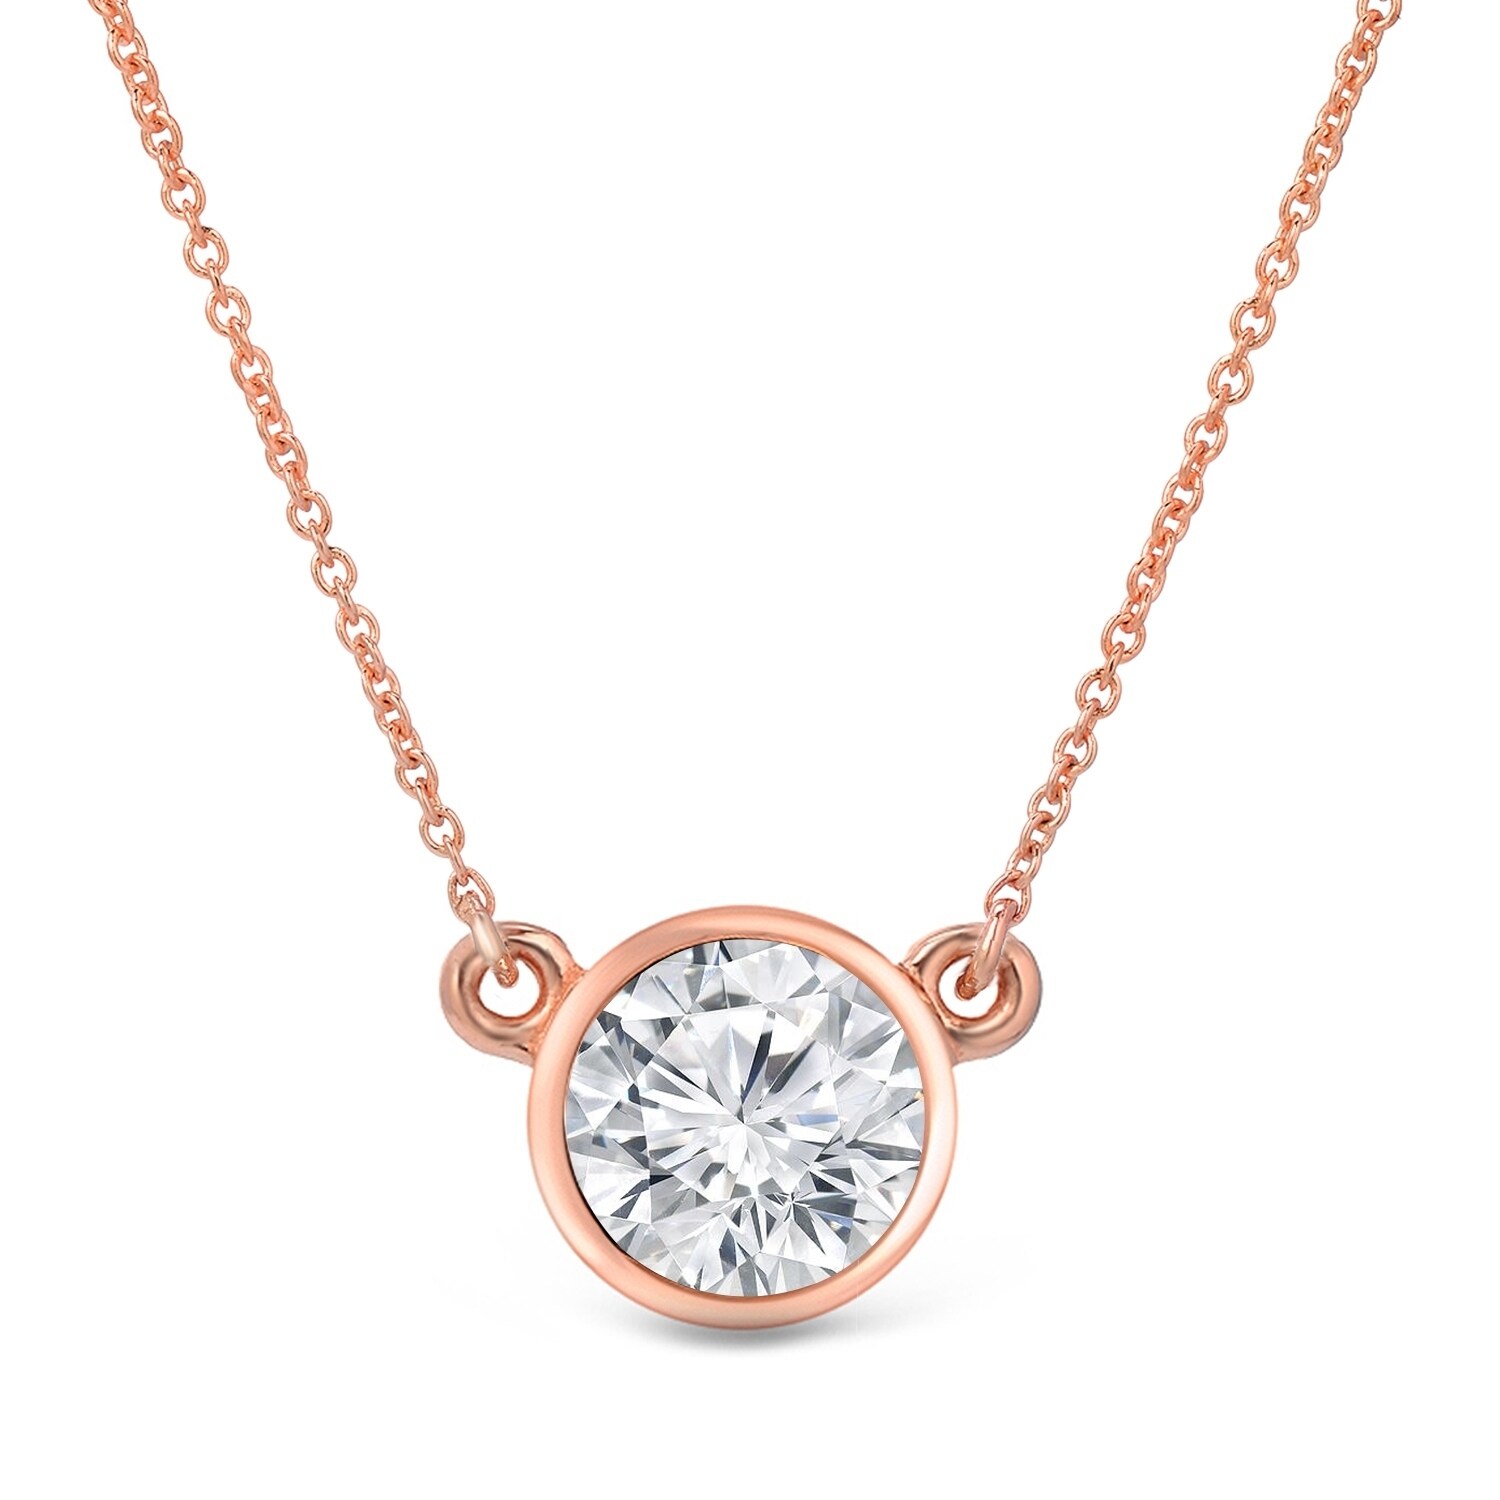 14k rose gold Charles and Colvard Forever One Moissanite bezel-set solitaire necklace suspended from a diamond-cut cable chain.